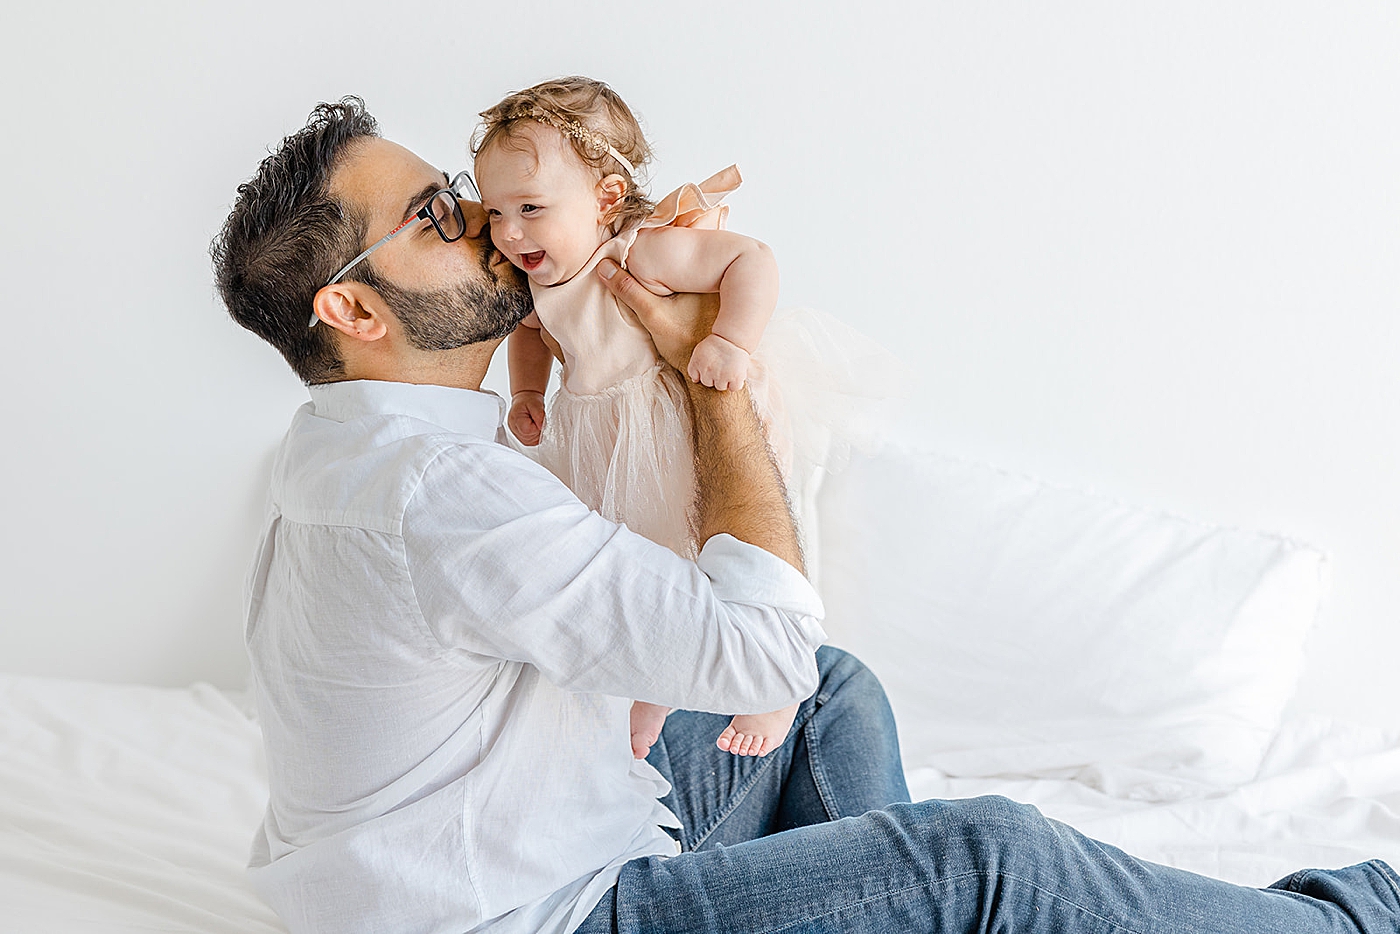 Dad kissing his baby girl | Image by Sana Ahmed Photography